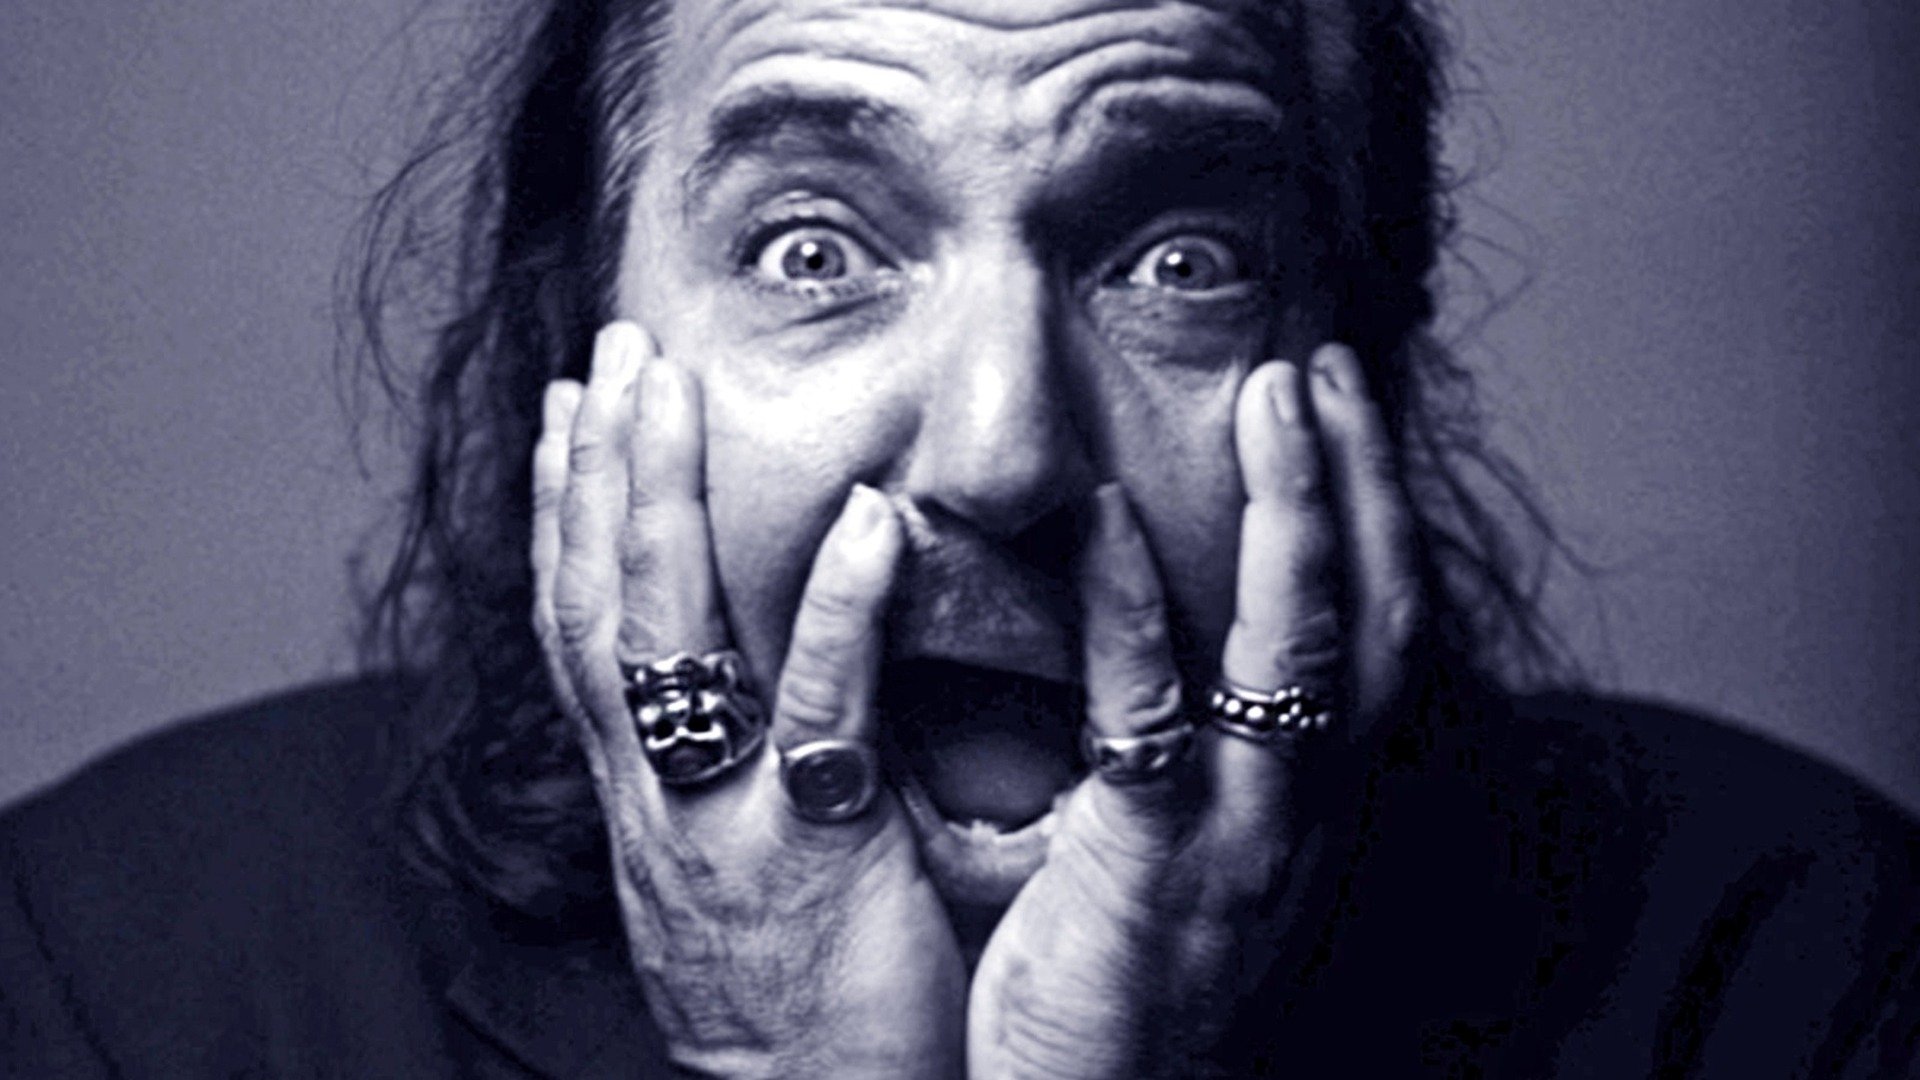 Ron Jeremy, Life After the Buffet